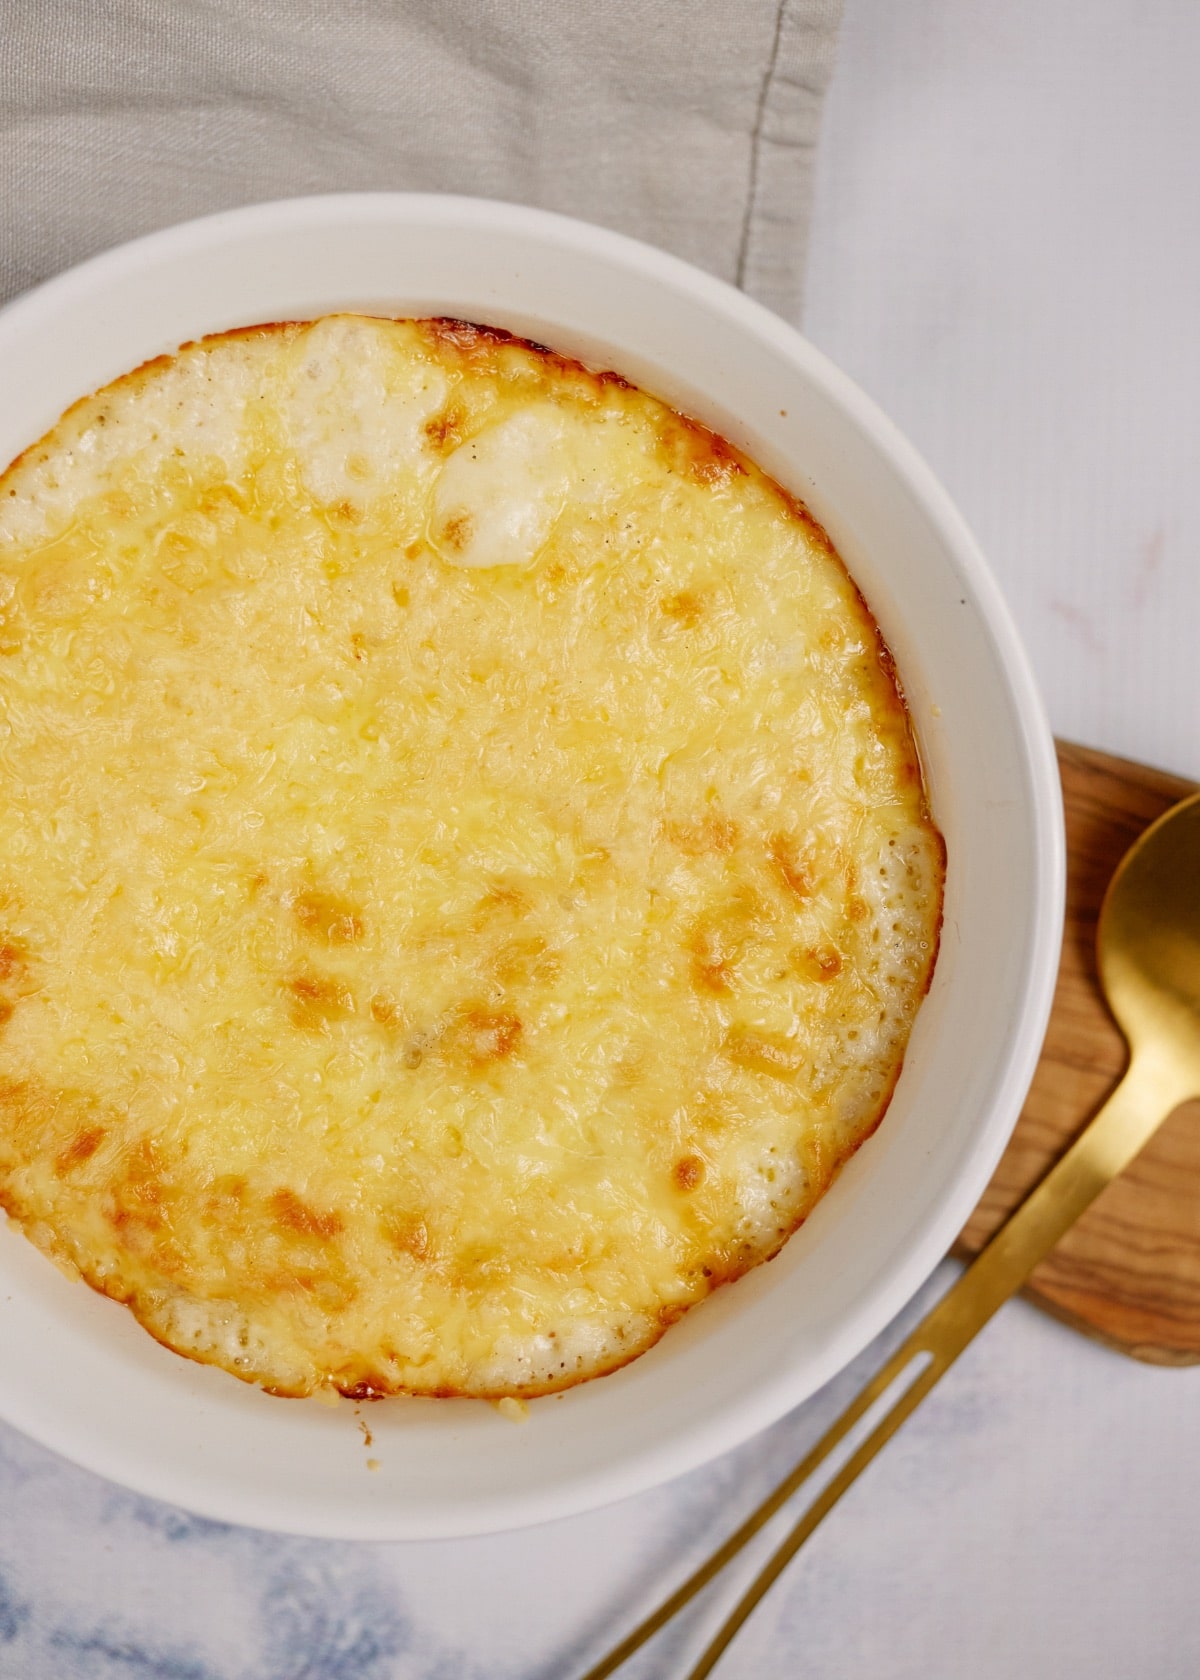 baked macaroni casserole in a white baking dish on a wood board